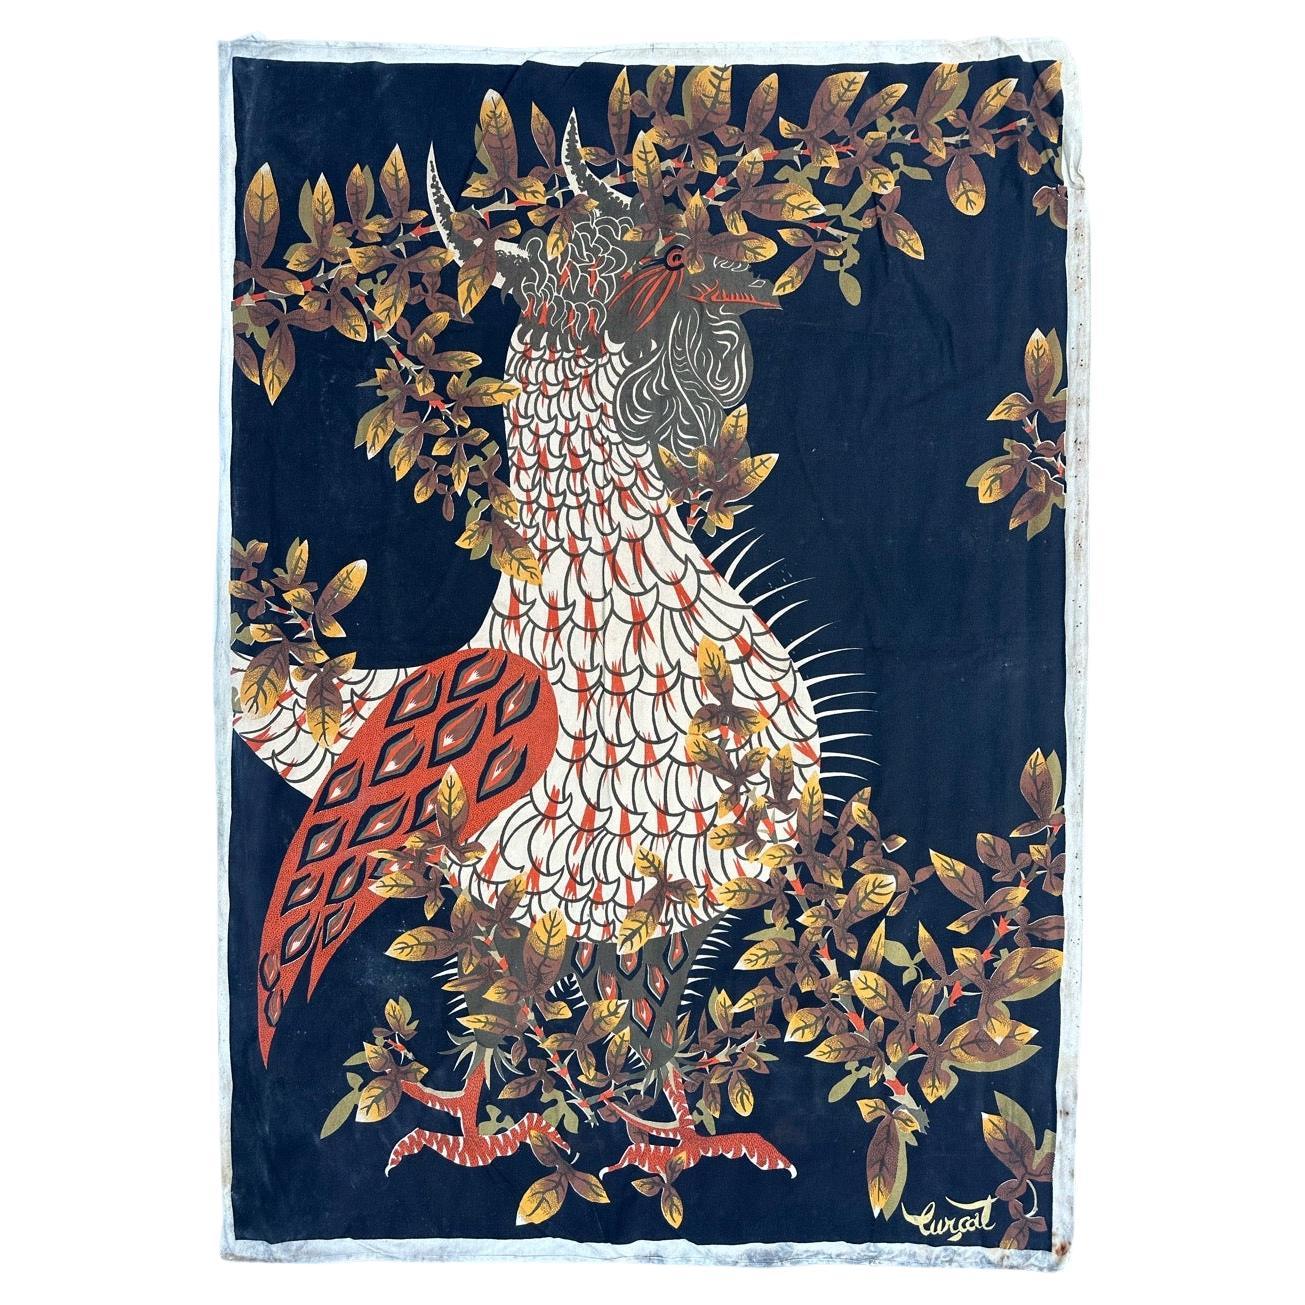 Bobyrug’s Nice Antique French Hand Printed Lurçat Signed Tapestry « Rooster »